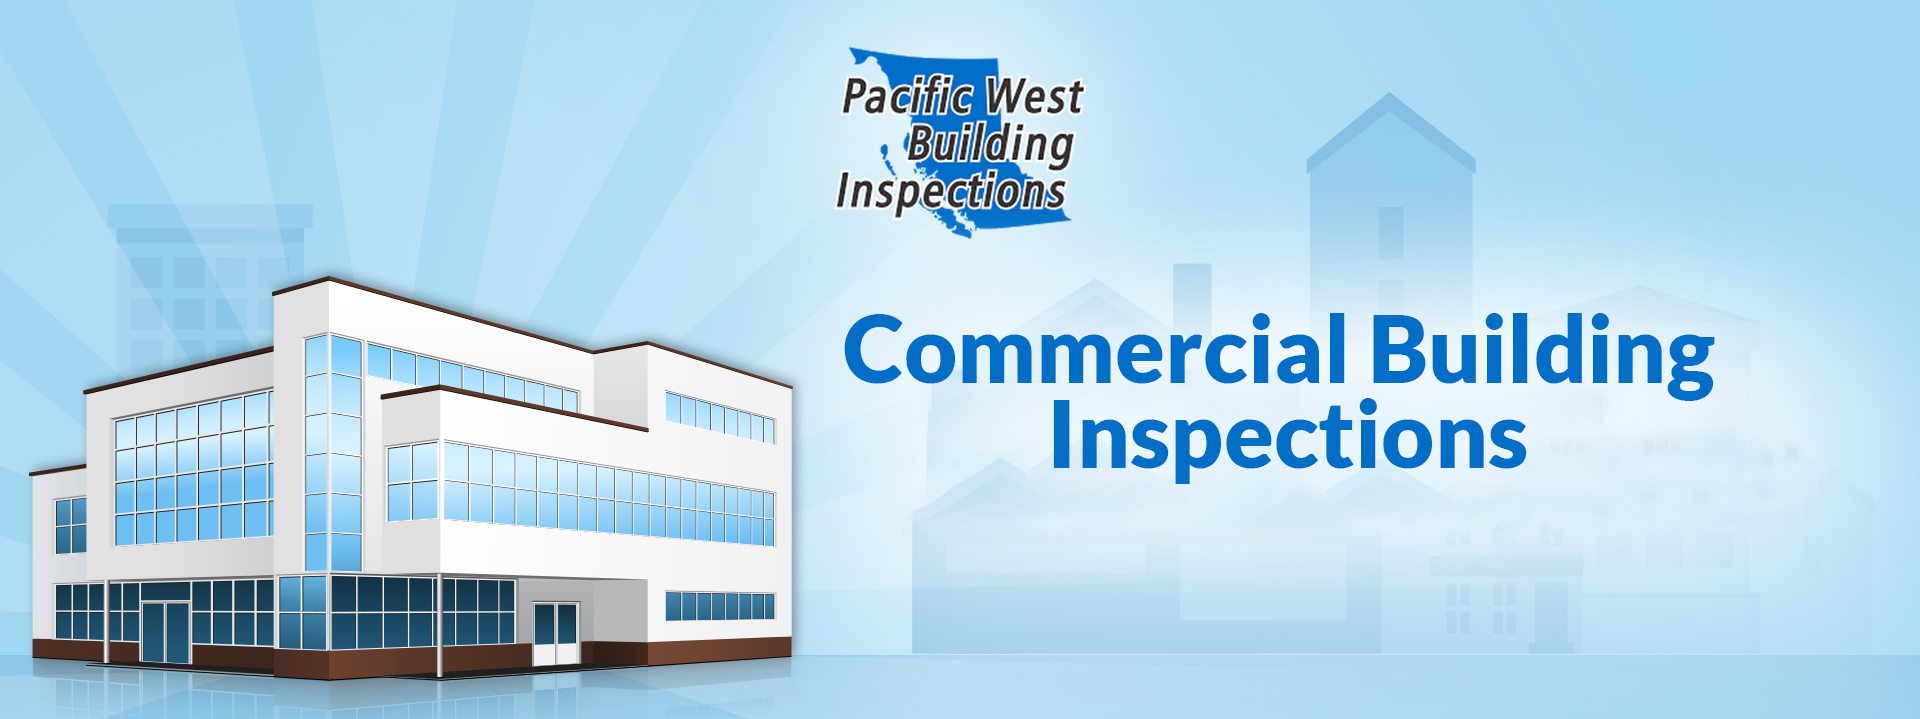 Pacific West Building Consultants